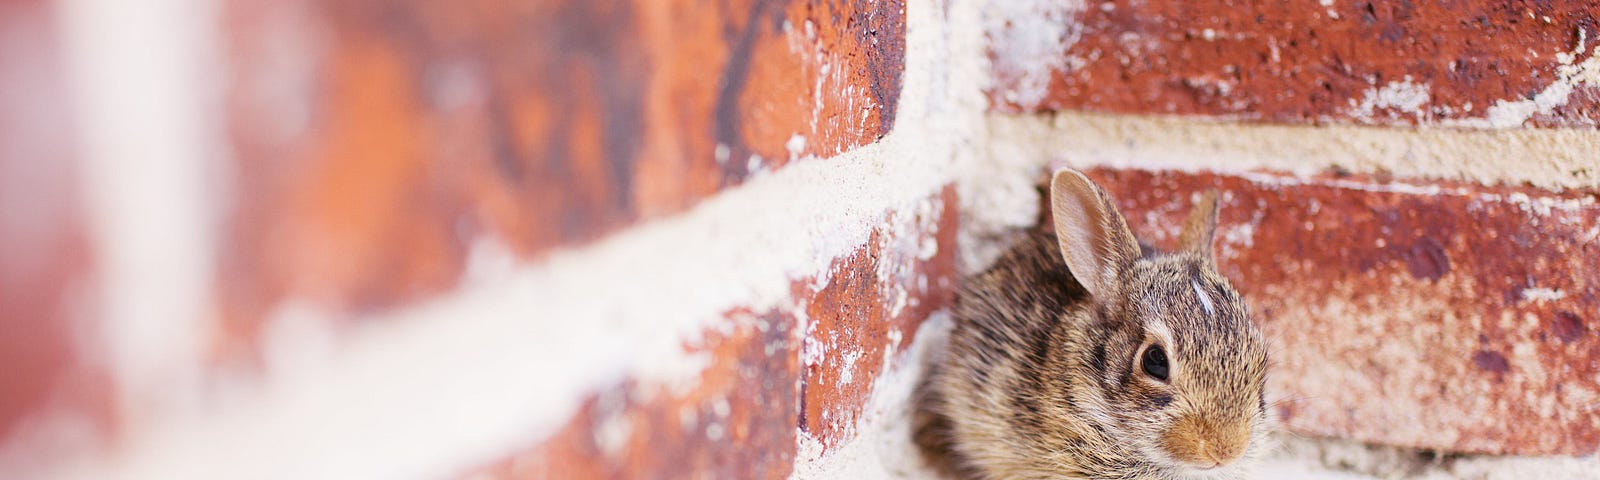 Tiny rabbit in a corner of a brick wall.